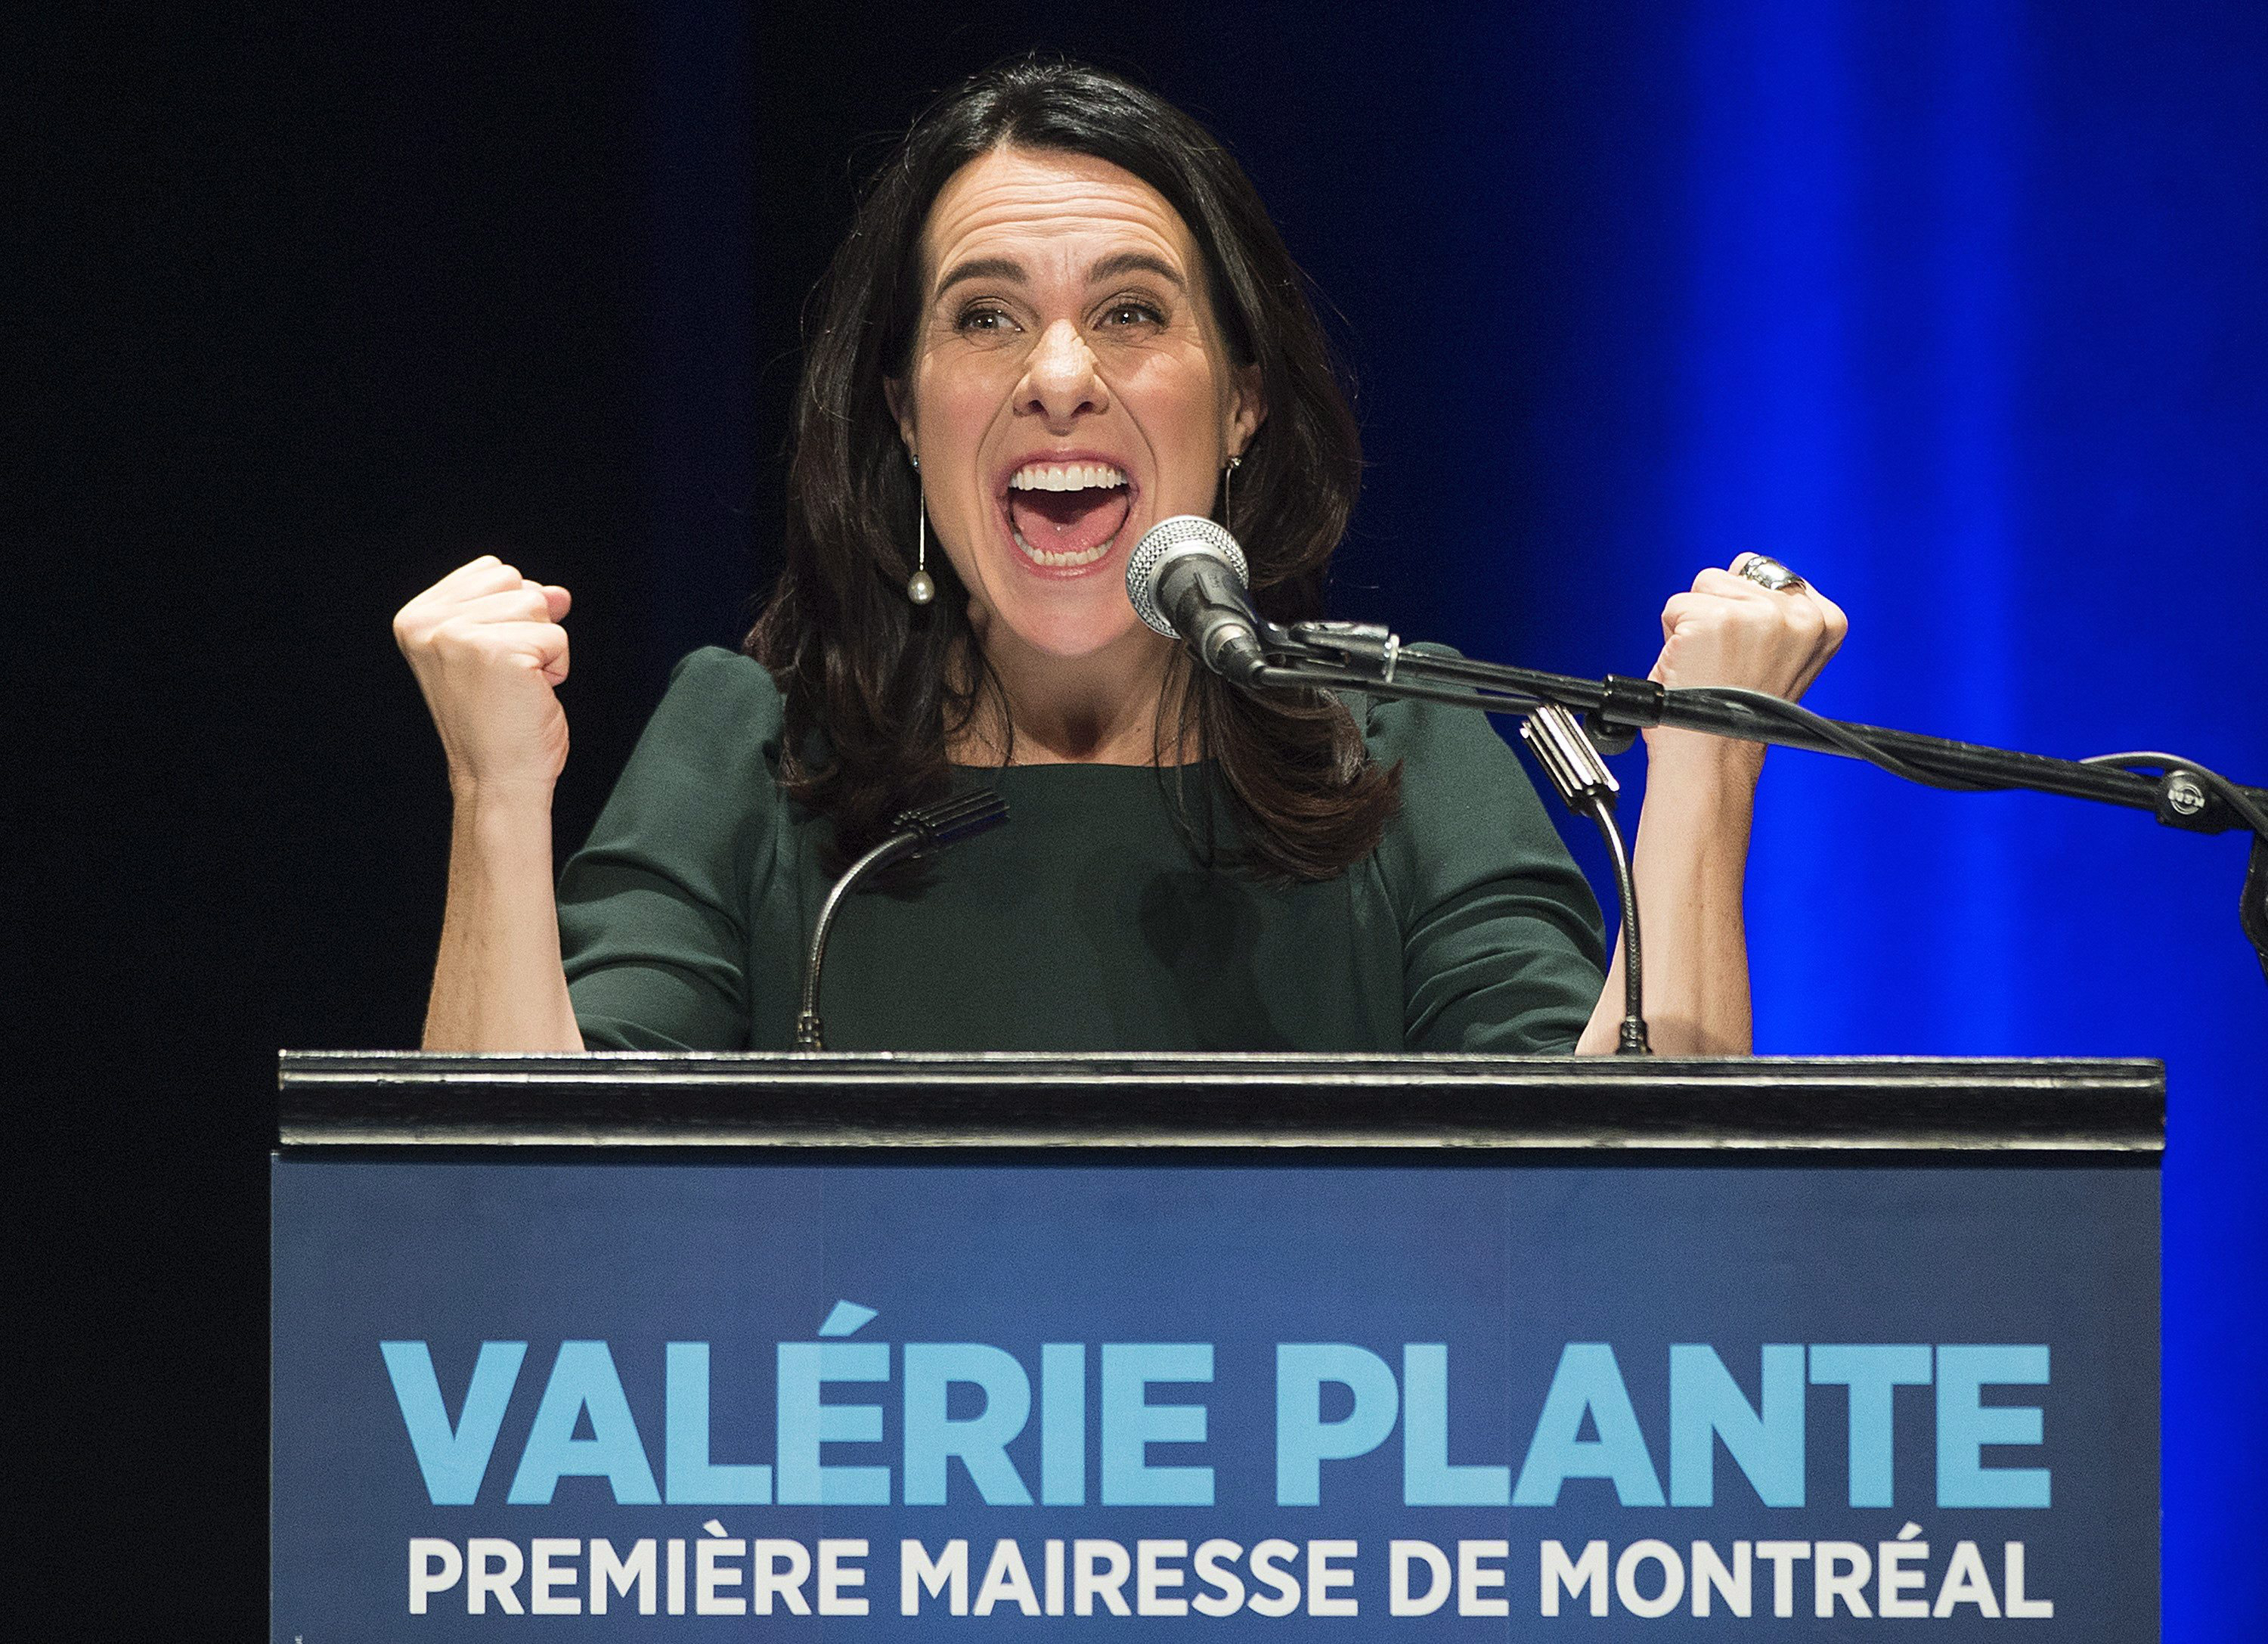 Valerie Plante speaks to supporters after being elected mayor of Montreal on municipal election night in Montreal, Sunday, November 5, 2017. THE CANADIAN PRESS/Graham Hughes